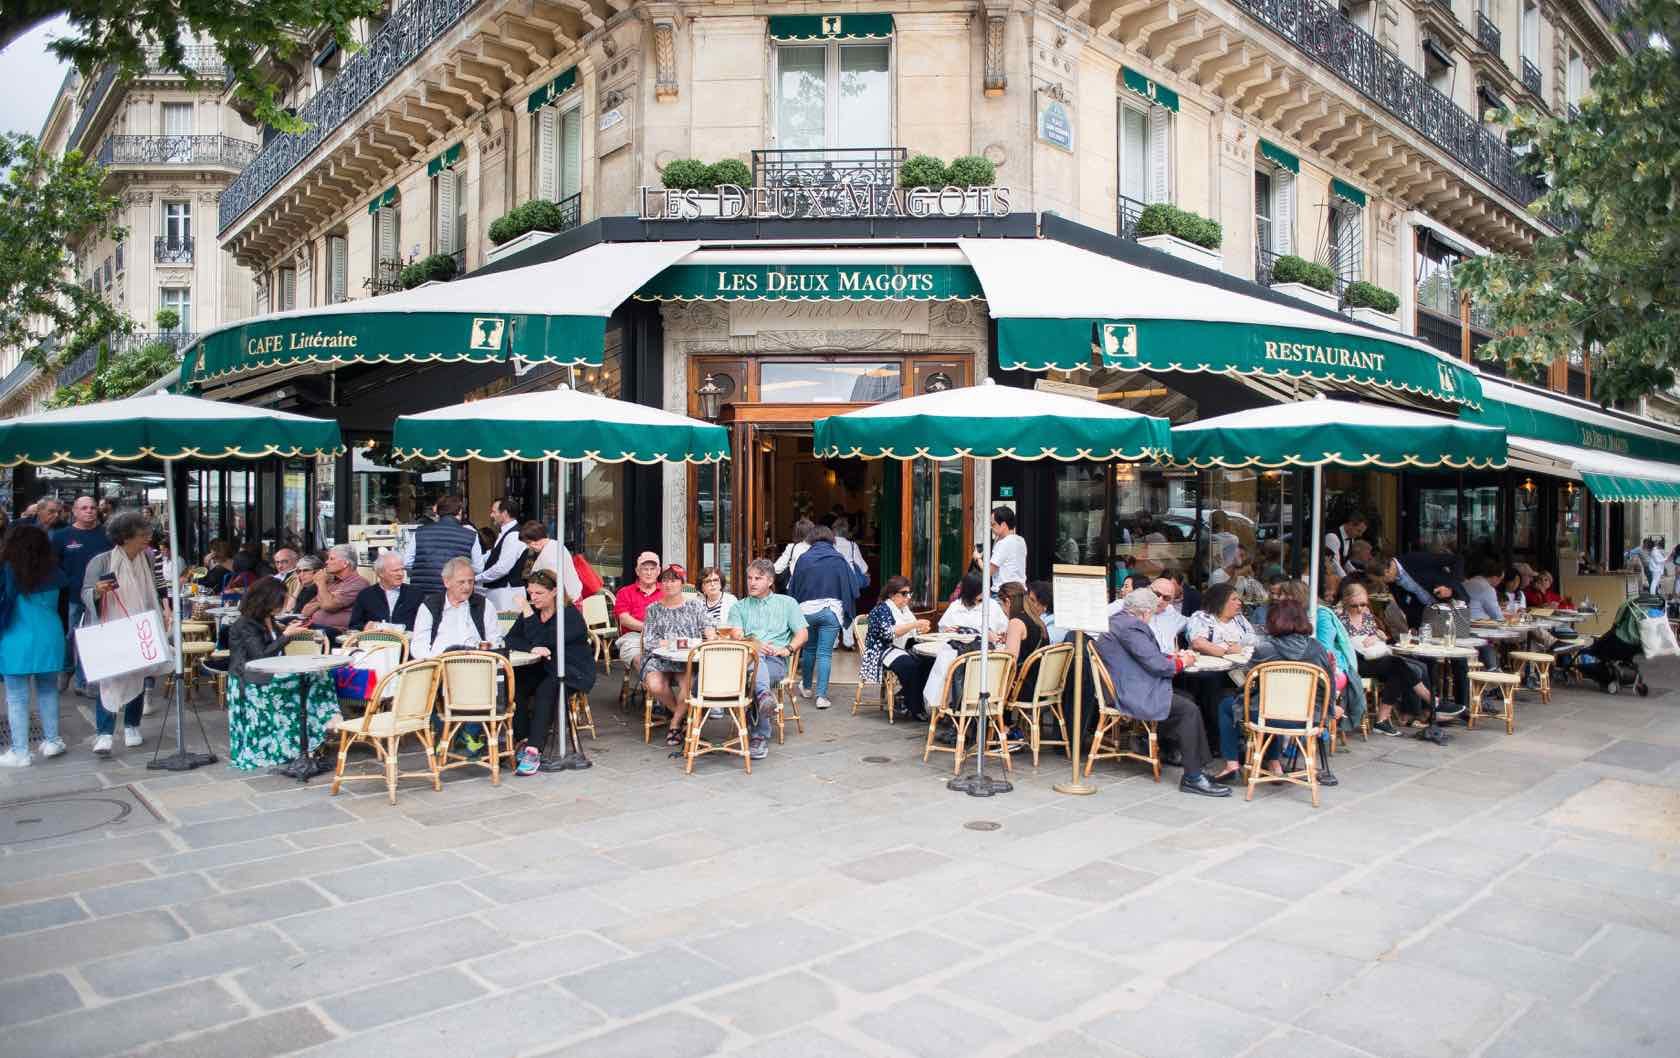 Everything-You-Want-To-Know-About-the-Cafe-Terraces-in-Paris-by-Paris-Perfect4.jpg